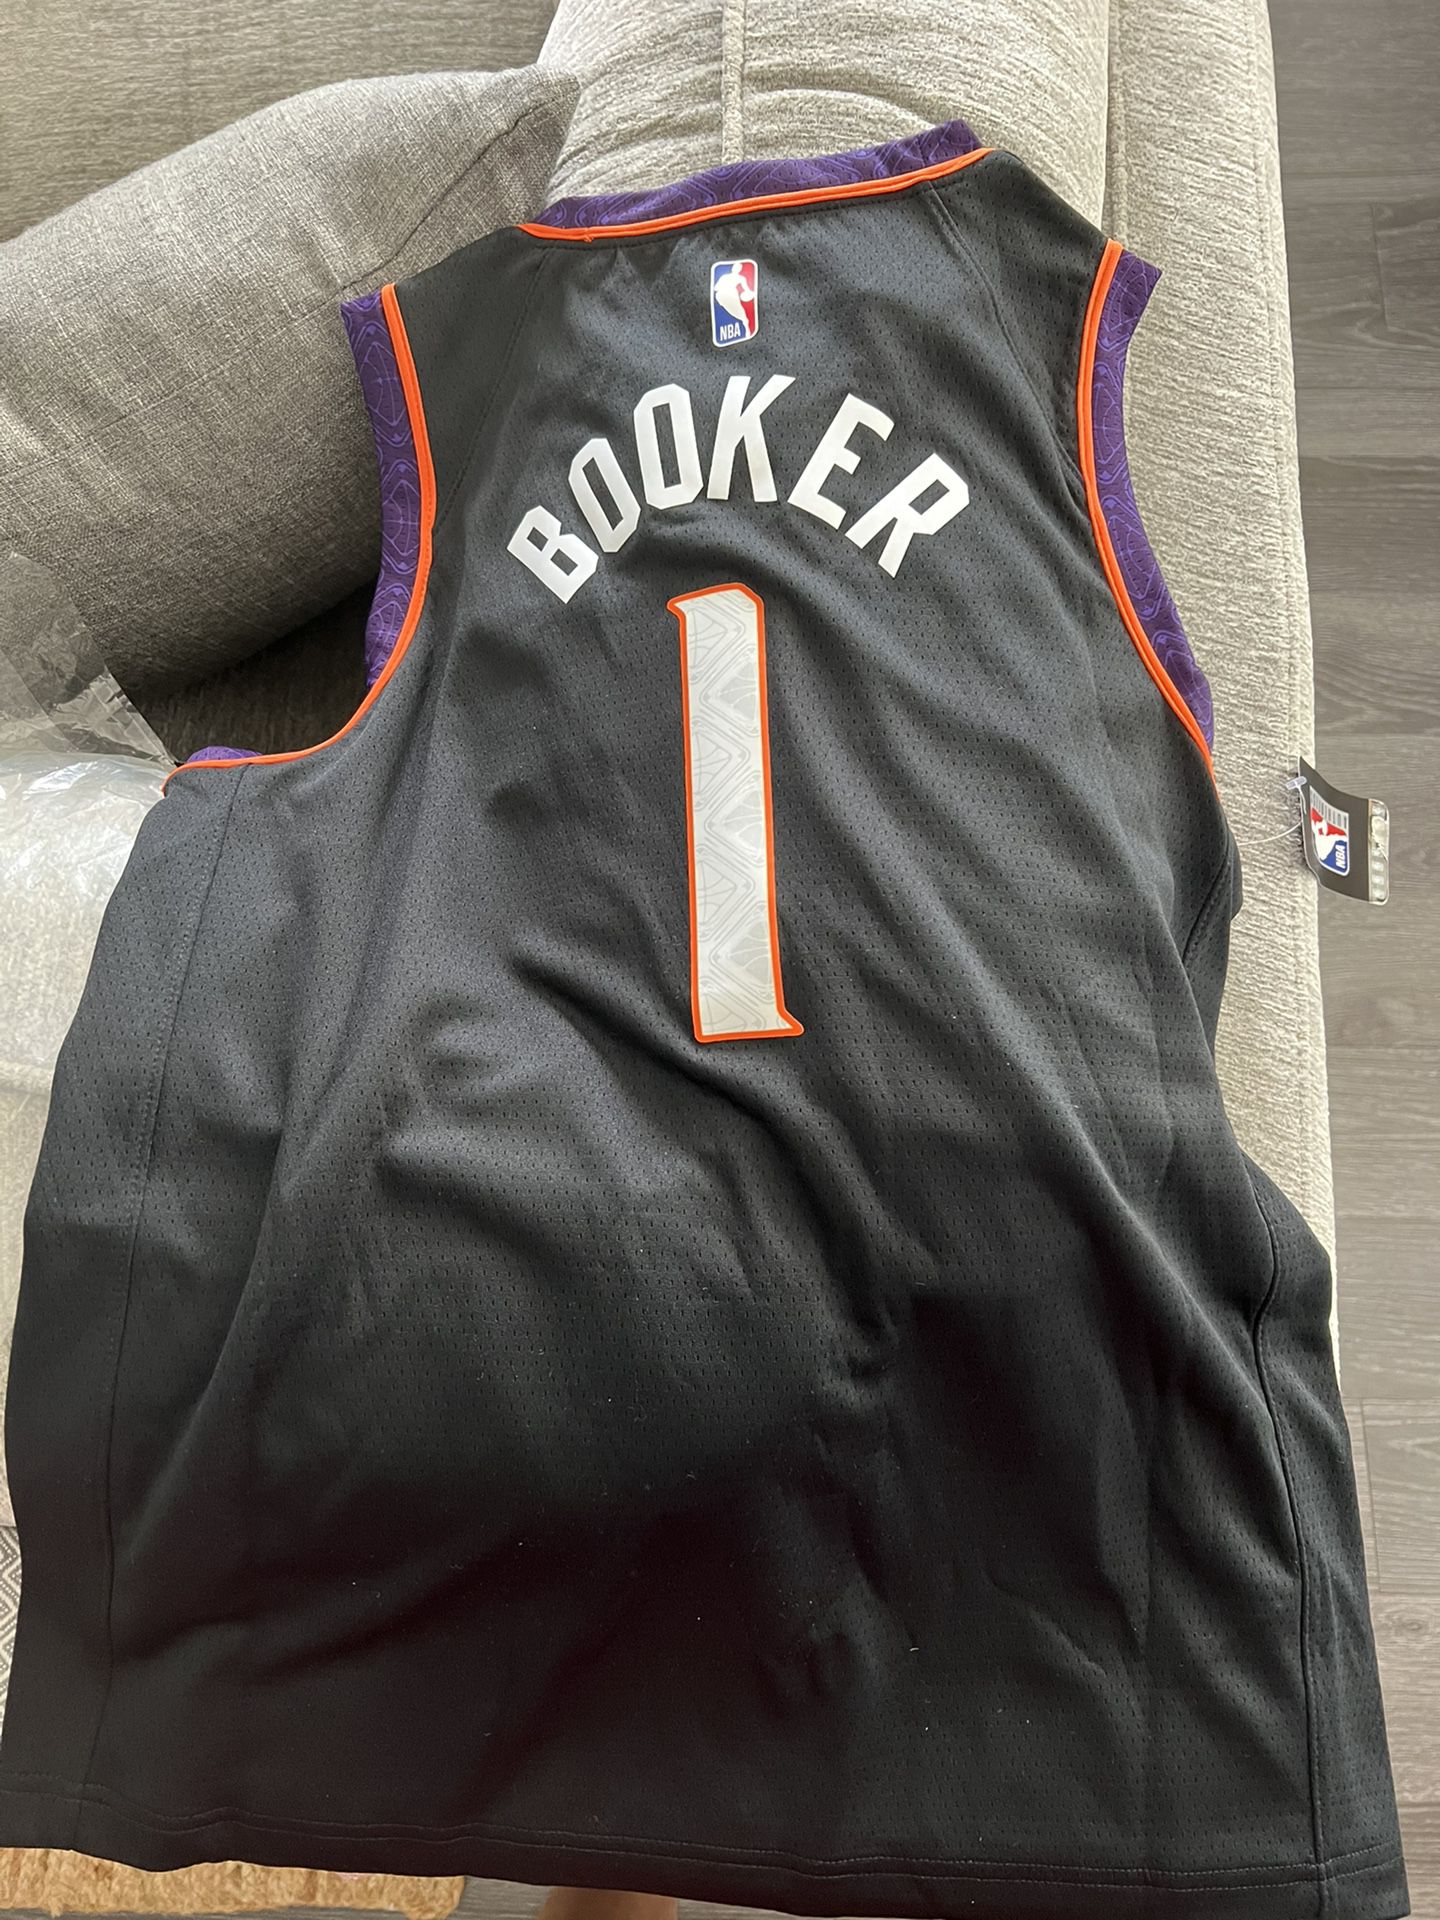 YOUTH LARGE NBA AUTHENTIC SUNS CITY DEVIN BOOKER